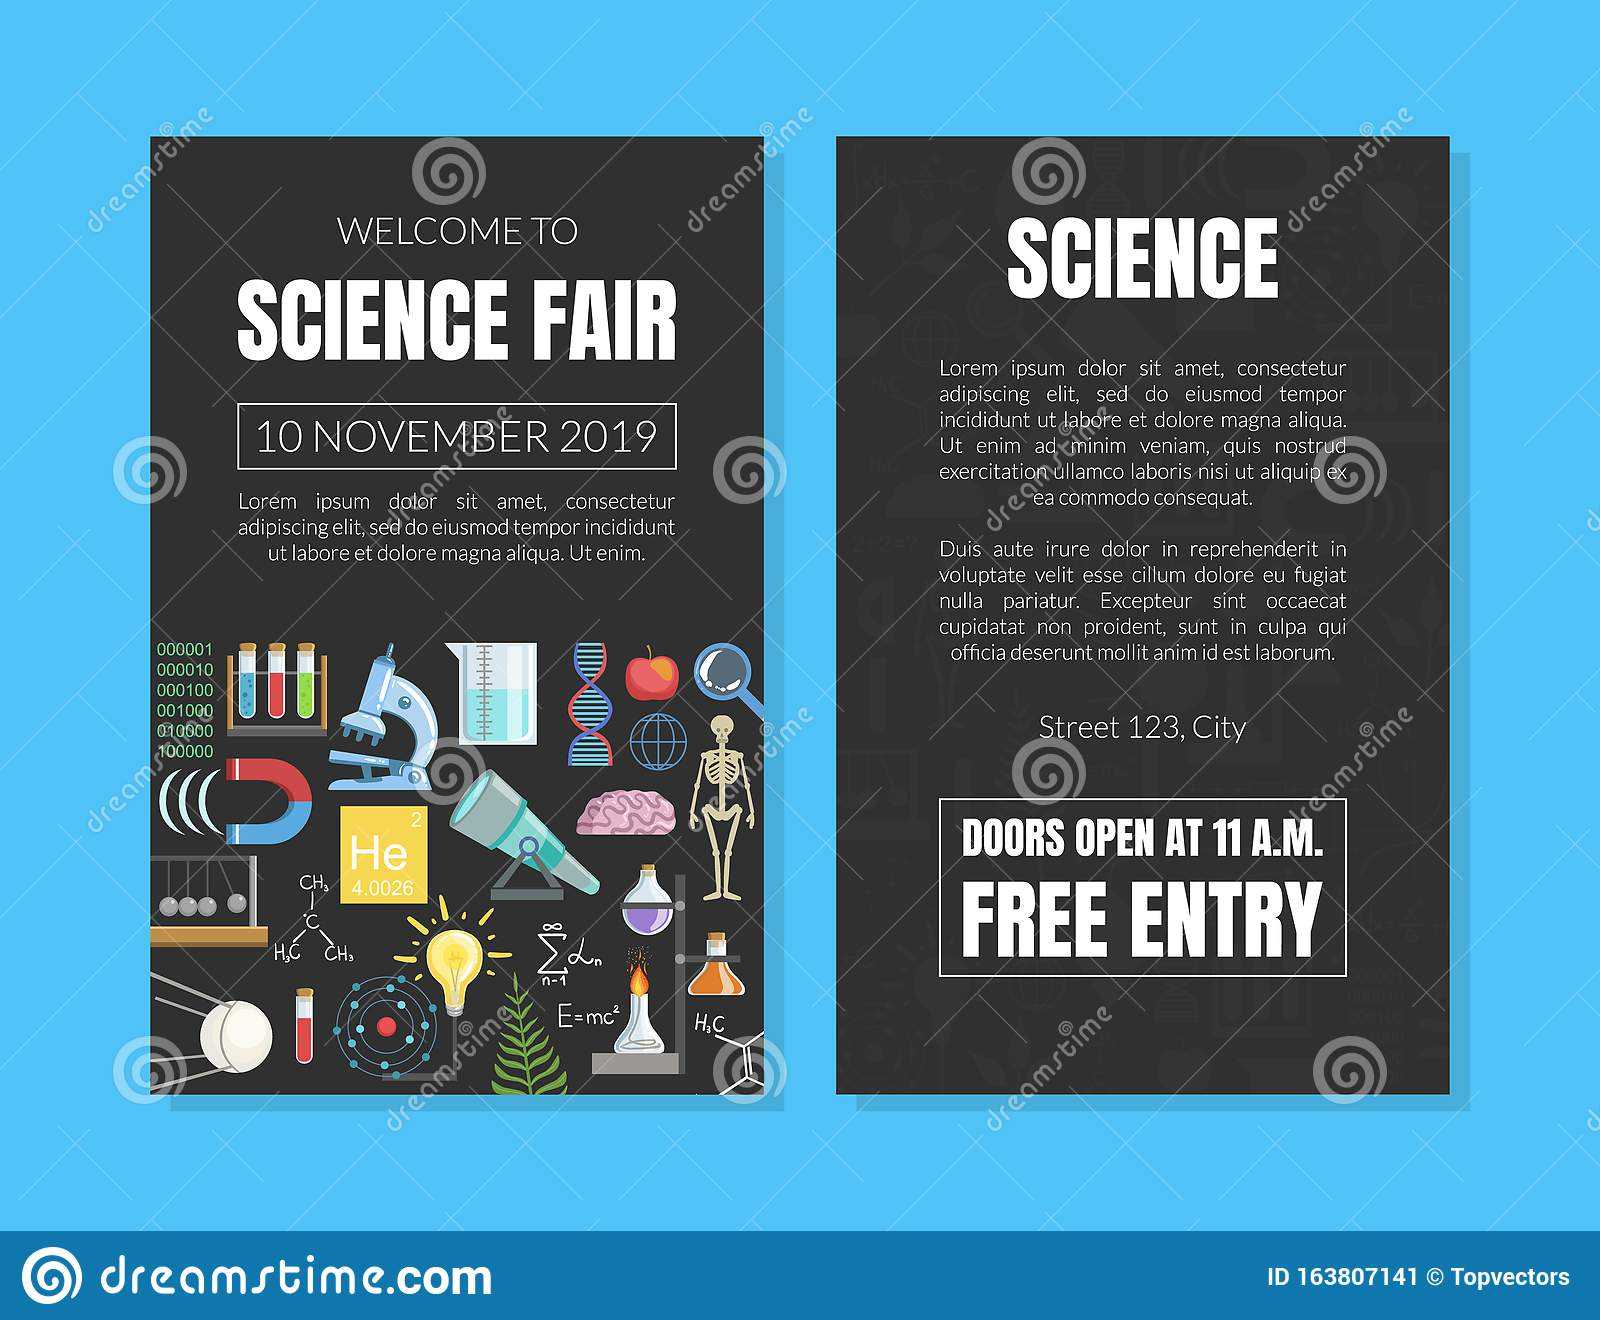 Welcome To Science Fair Invitation Card Template, Scientific Regarding Science Fair Banner Template